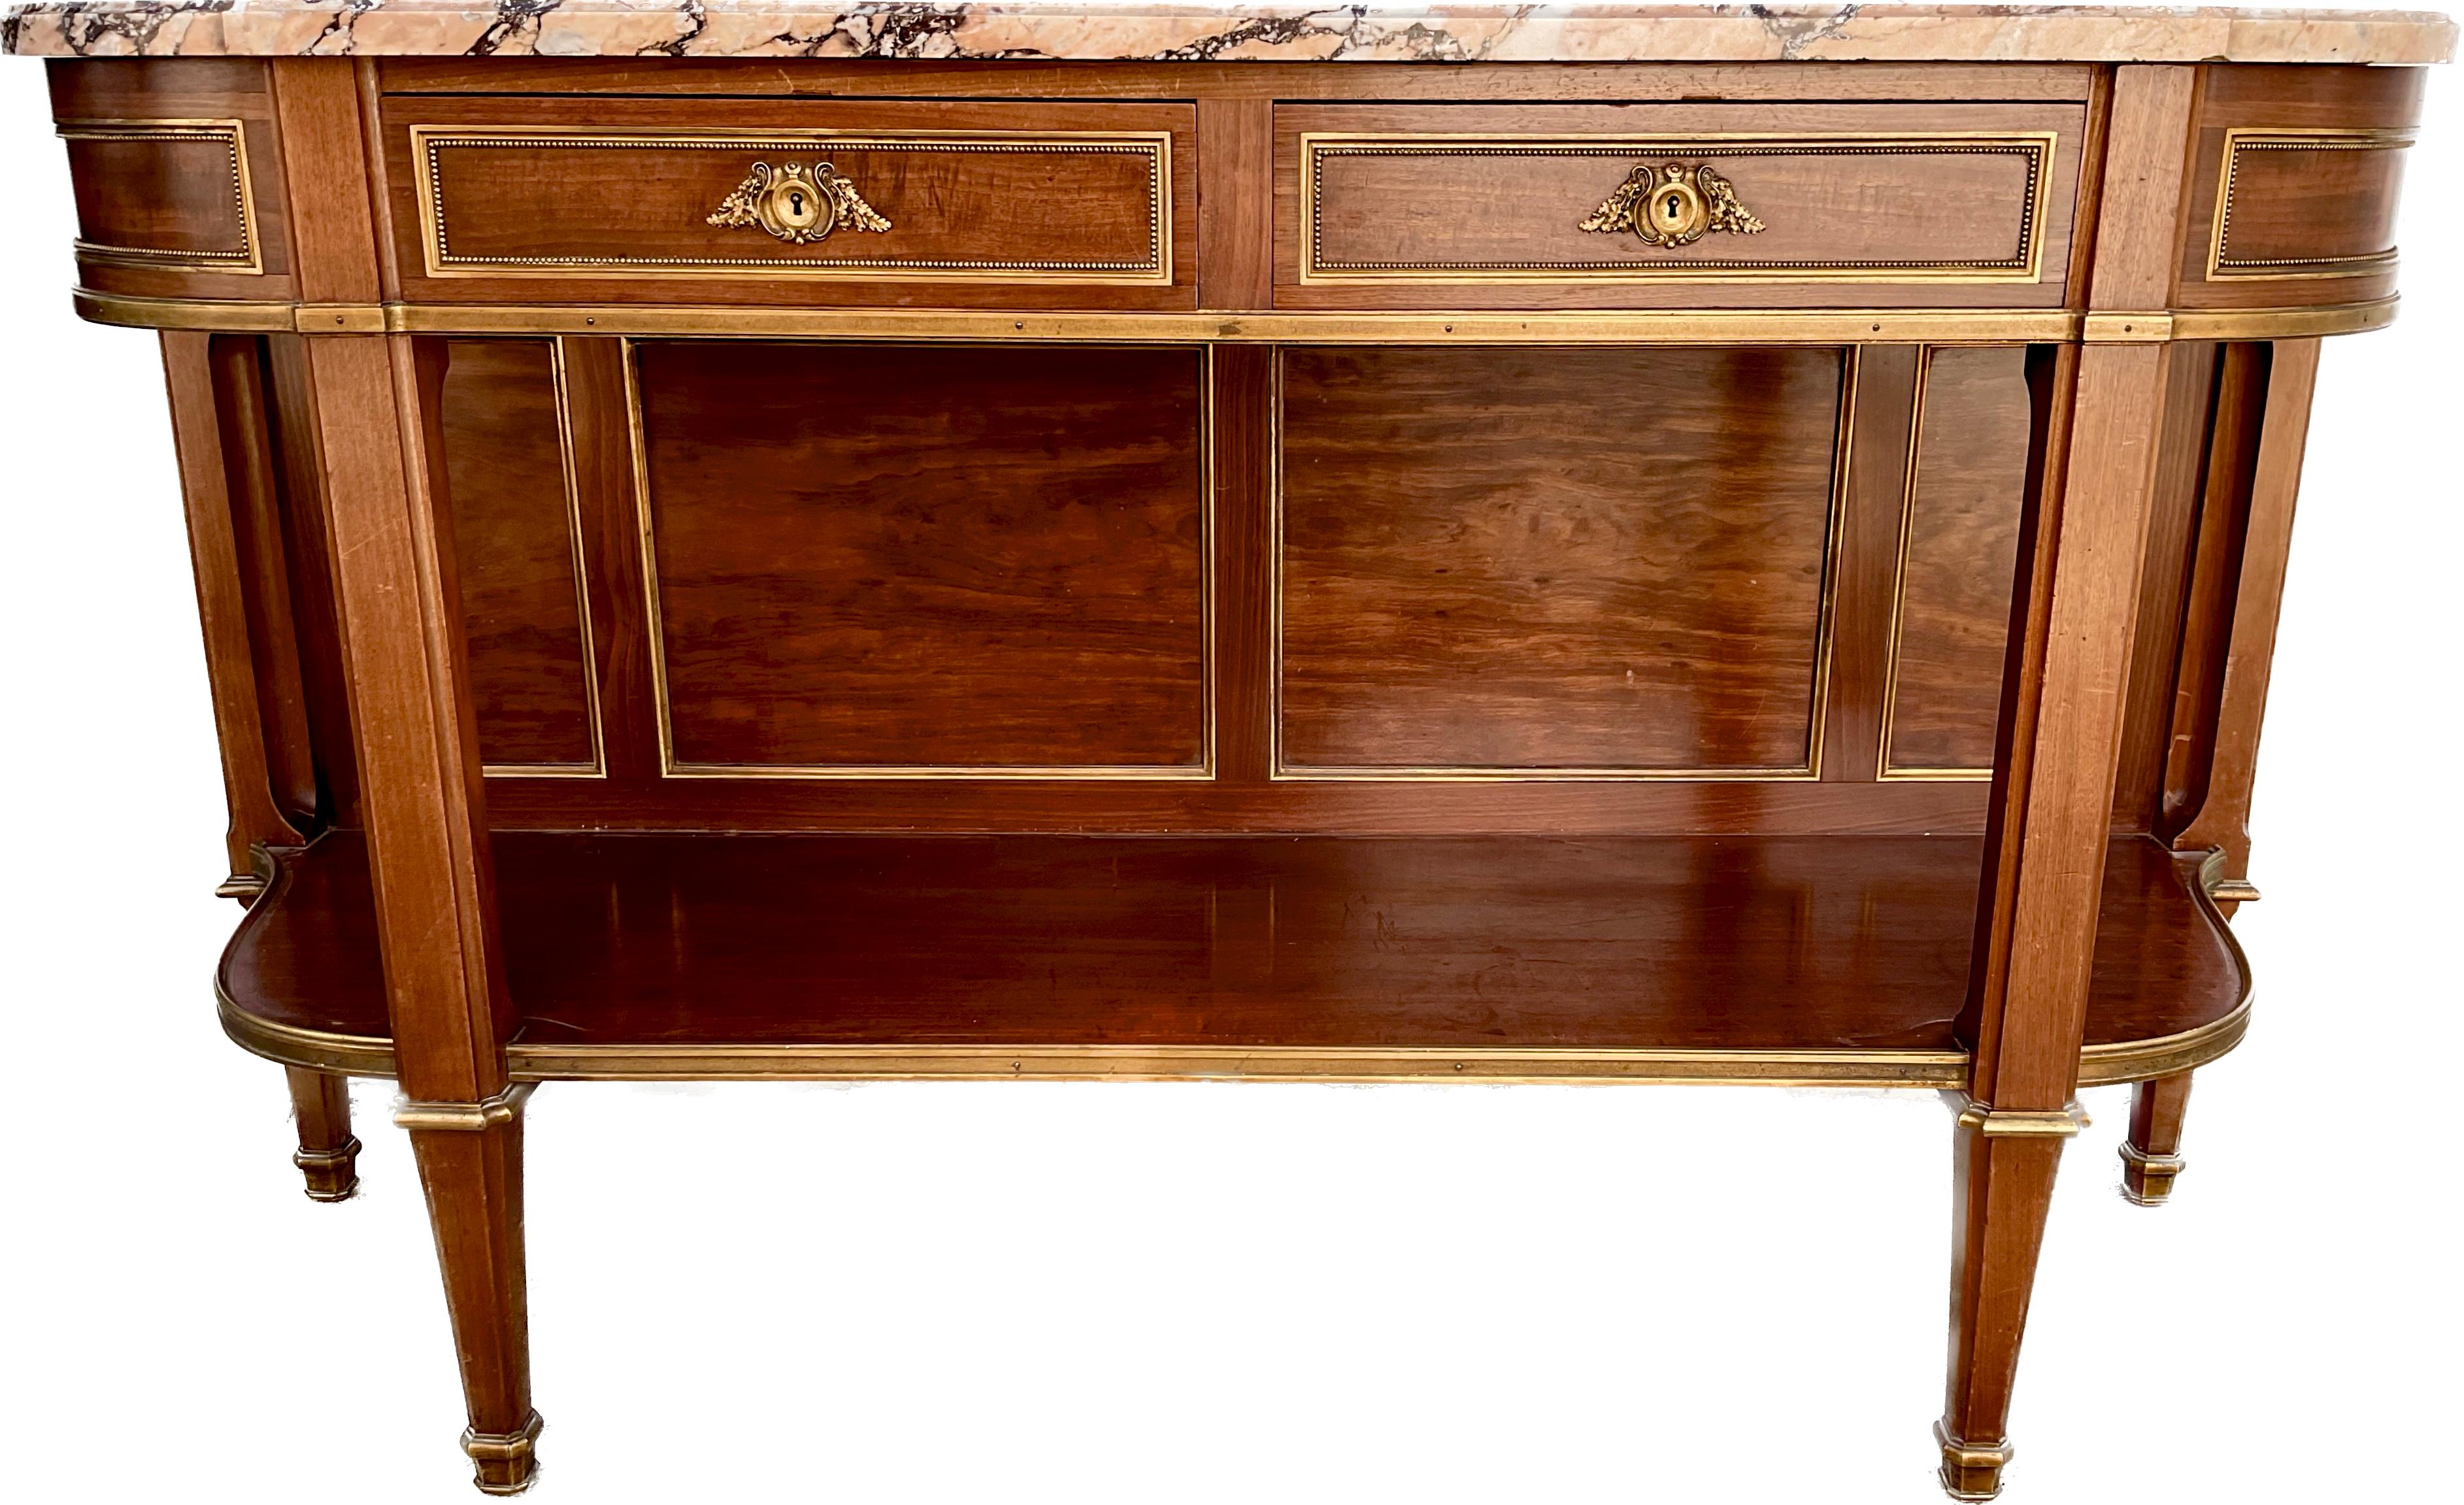 An exquisite French 19th century Louis XVI style mahogany serpentine two drawer open buffet with original Breche Marble top. Bronze ormolu escutcheons and trim all around. Figured mahogany. The buffet is raised on tapered fluted legs with ormolu